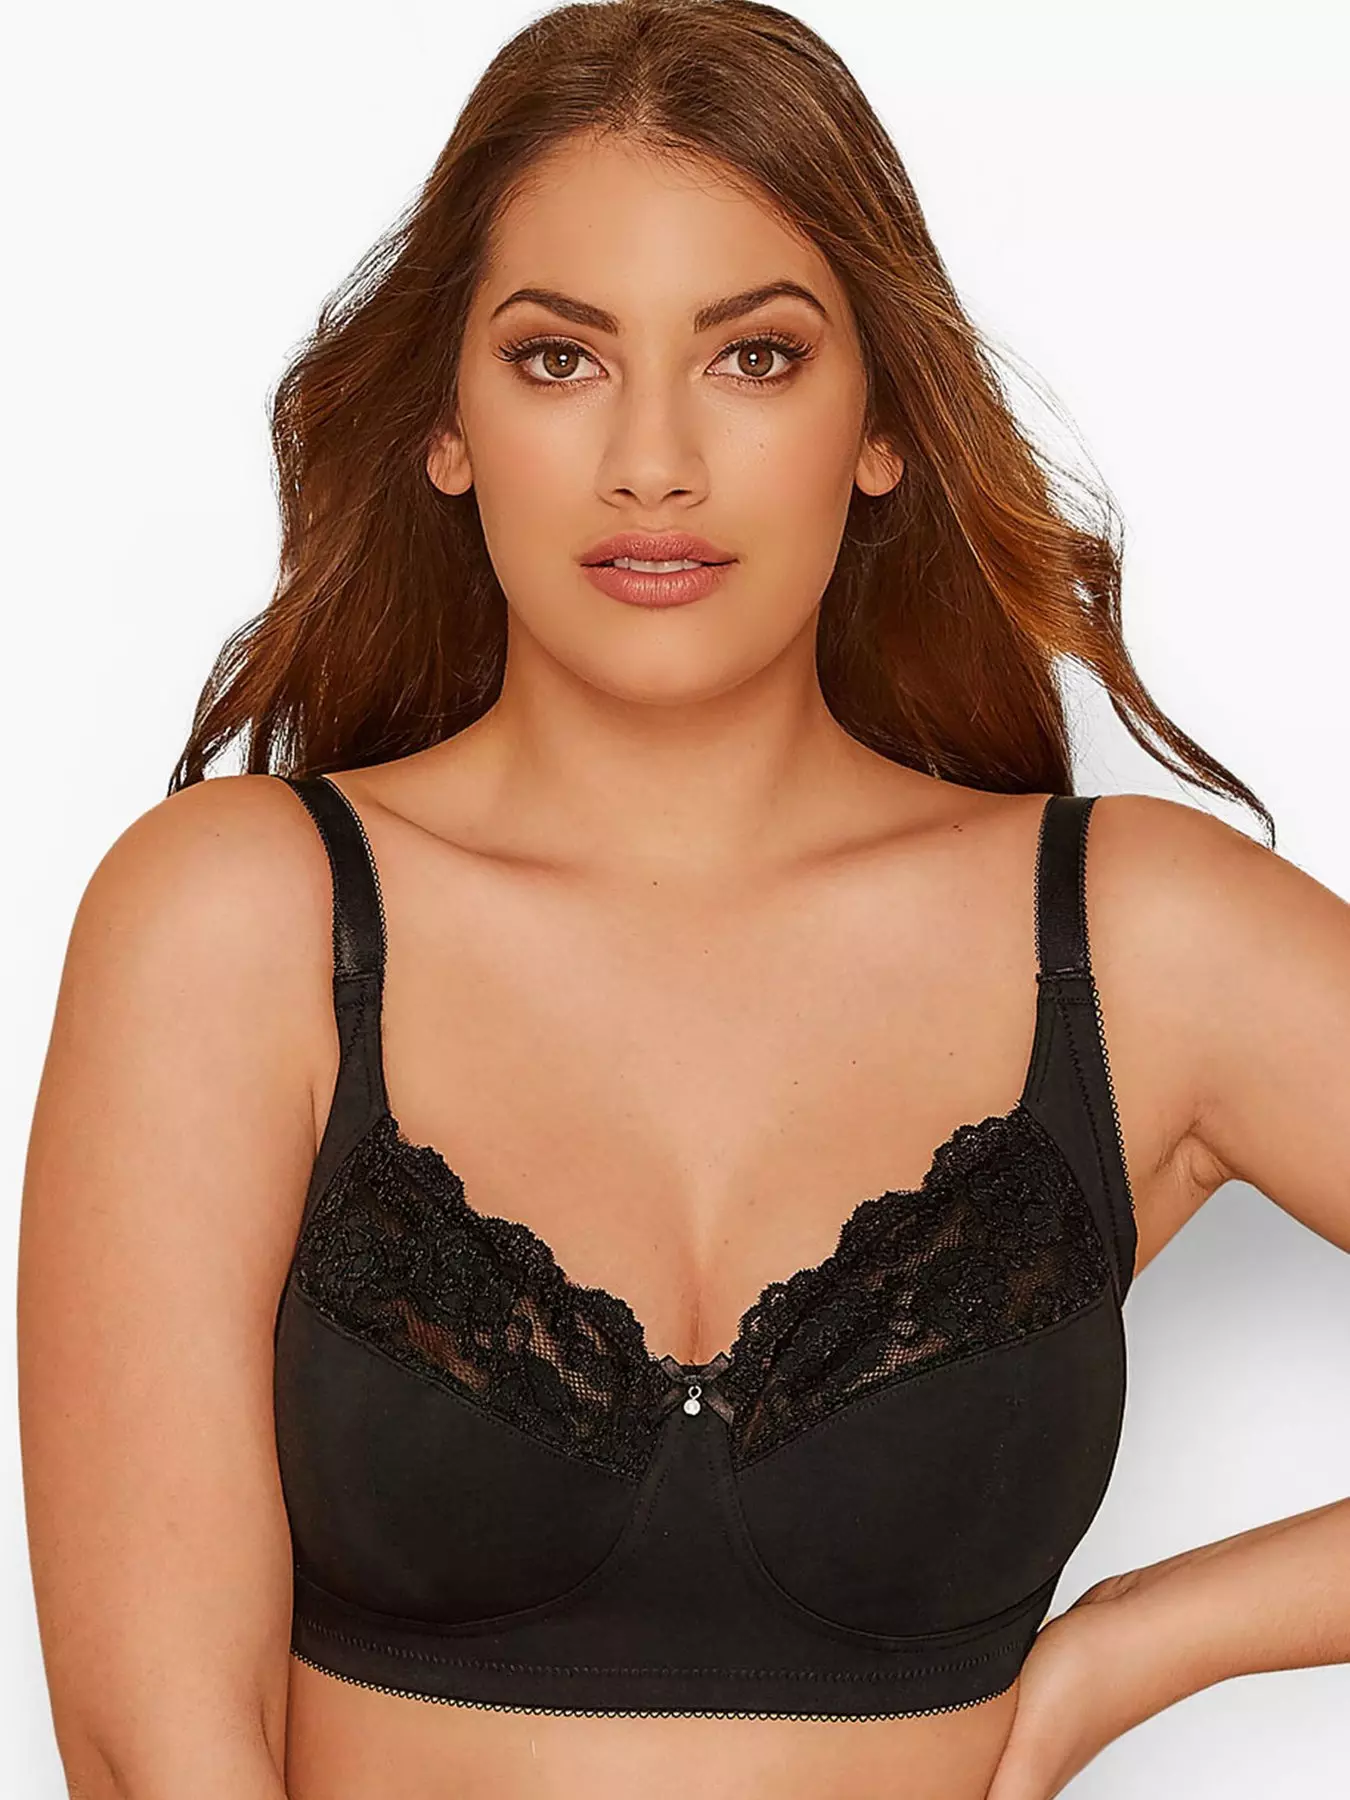  Miss Mary of Sweden Non-Wired Bra Embroidered Unpadded Cup  Shine Black : Clothing, Shoes & Jewelry